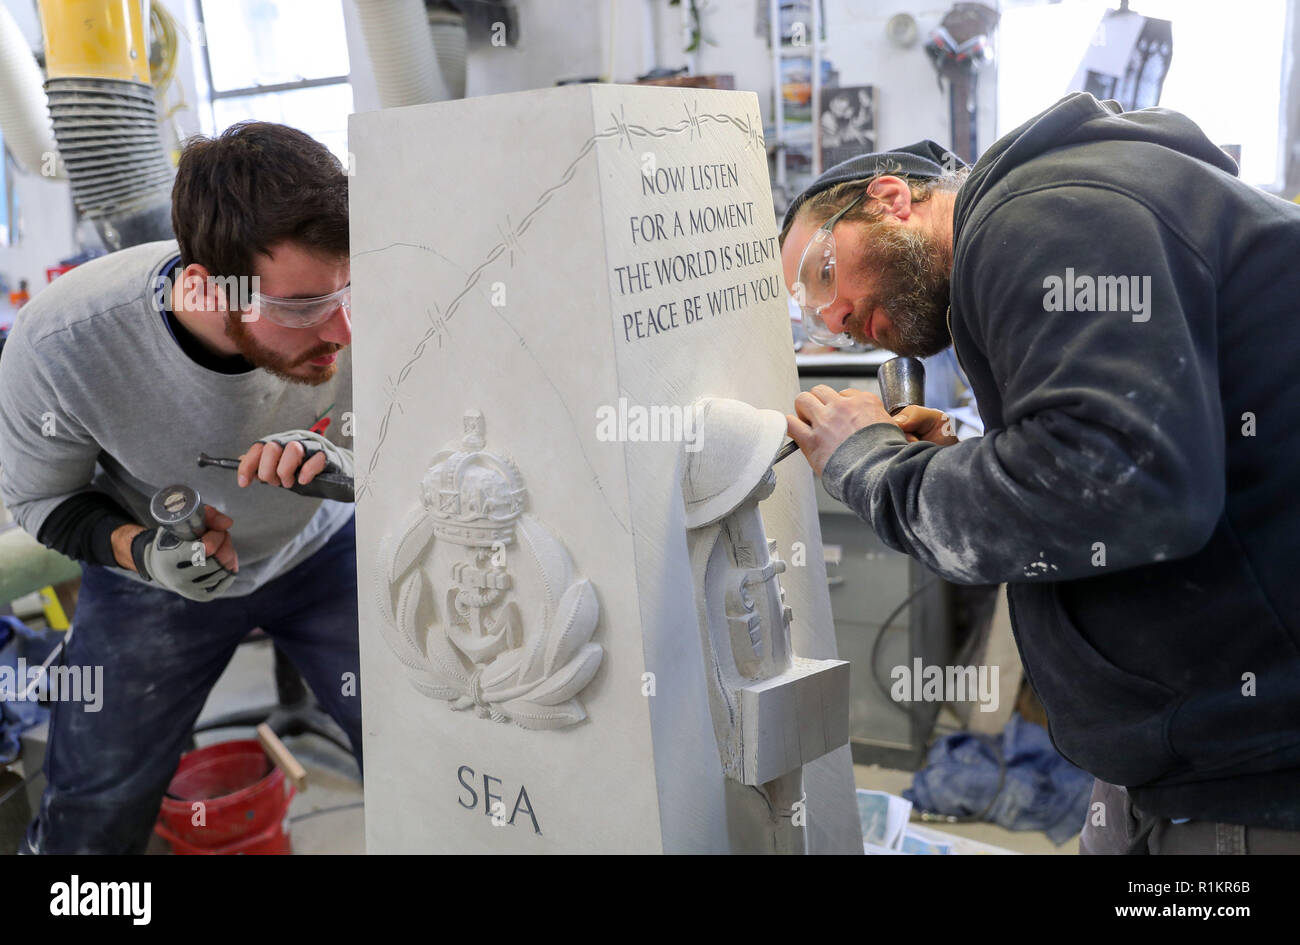 Stone masons from Salisbury cathedral work on a war memorial in their workshop which was designed by prisoners from Erlestoke prison in Wiltshire, and will be placed outside the prison's visitor's centre. Stock Photo